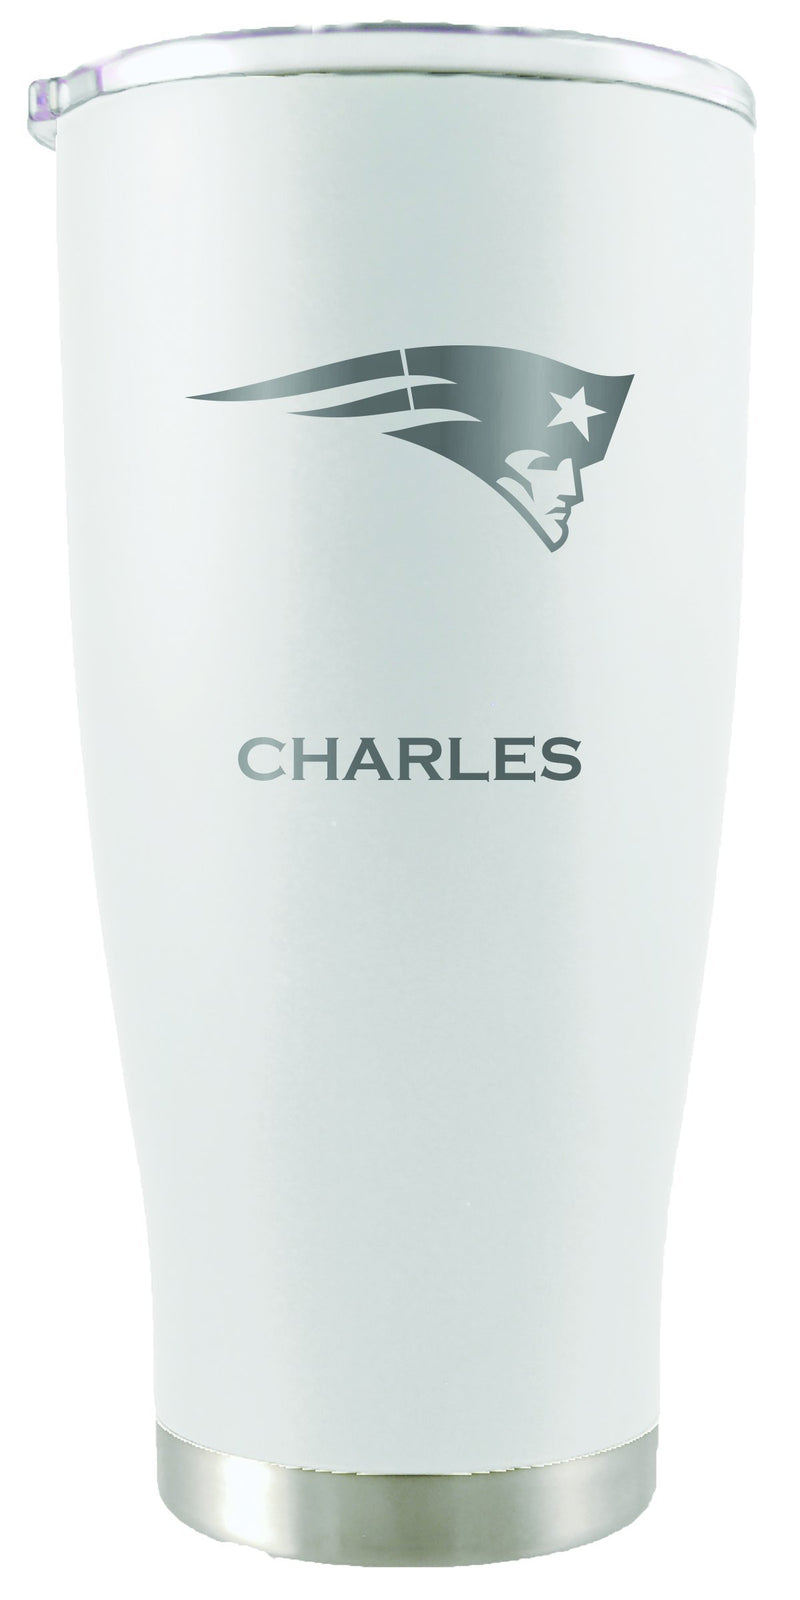 20oz White Personalized Stainless Steel Tumbler | New England Patriots
20oz, CurrentProduct, Drinkware_category_All, NEP, New England Patriots, NFL, Personalized_Personalized
The Memory Company